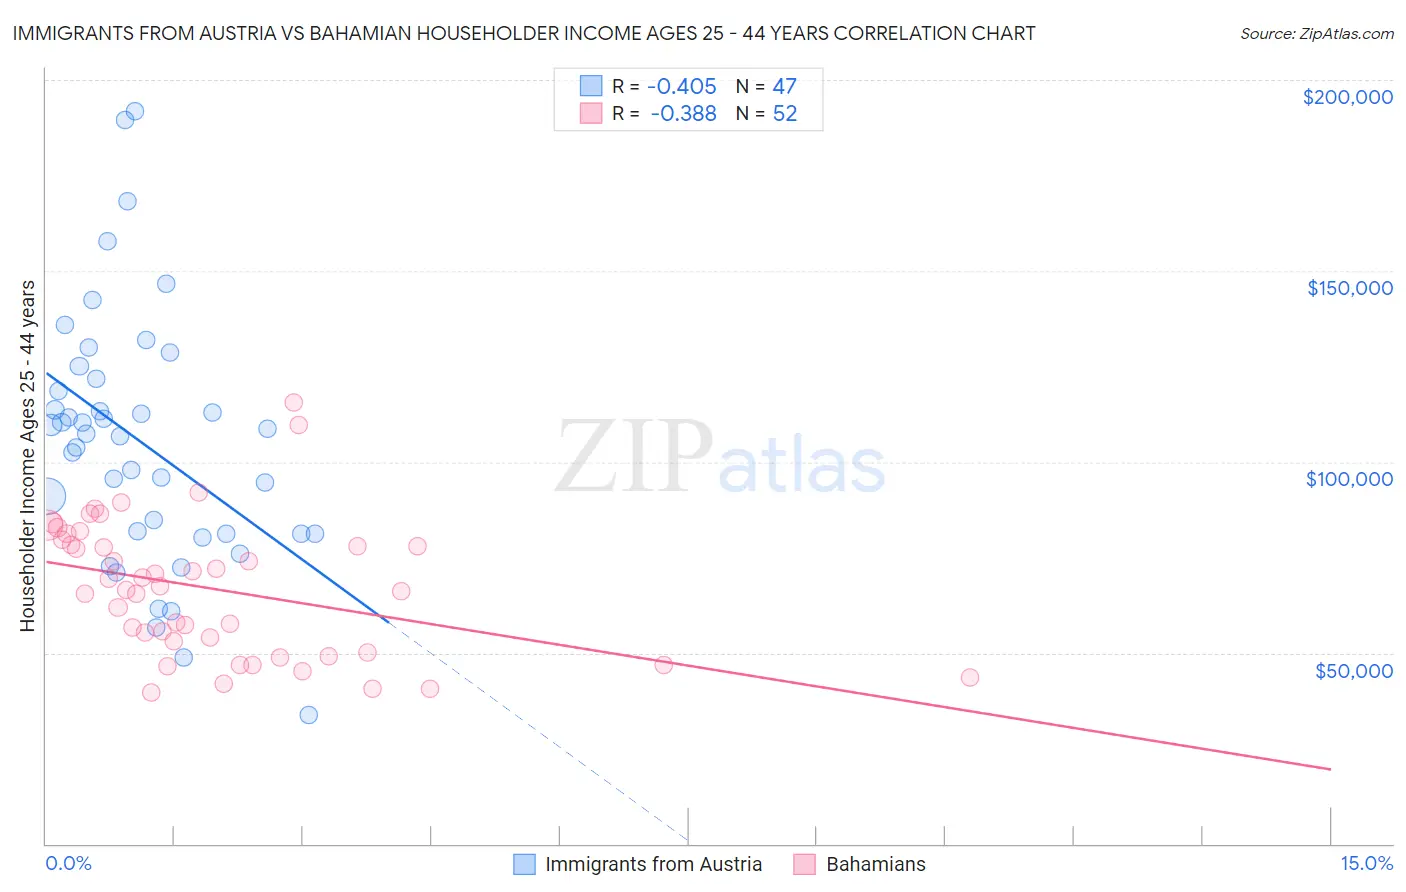 Immigrants from Austria vs Bahamian Householder Income Ages 25 - 44 years